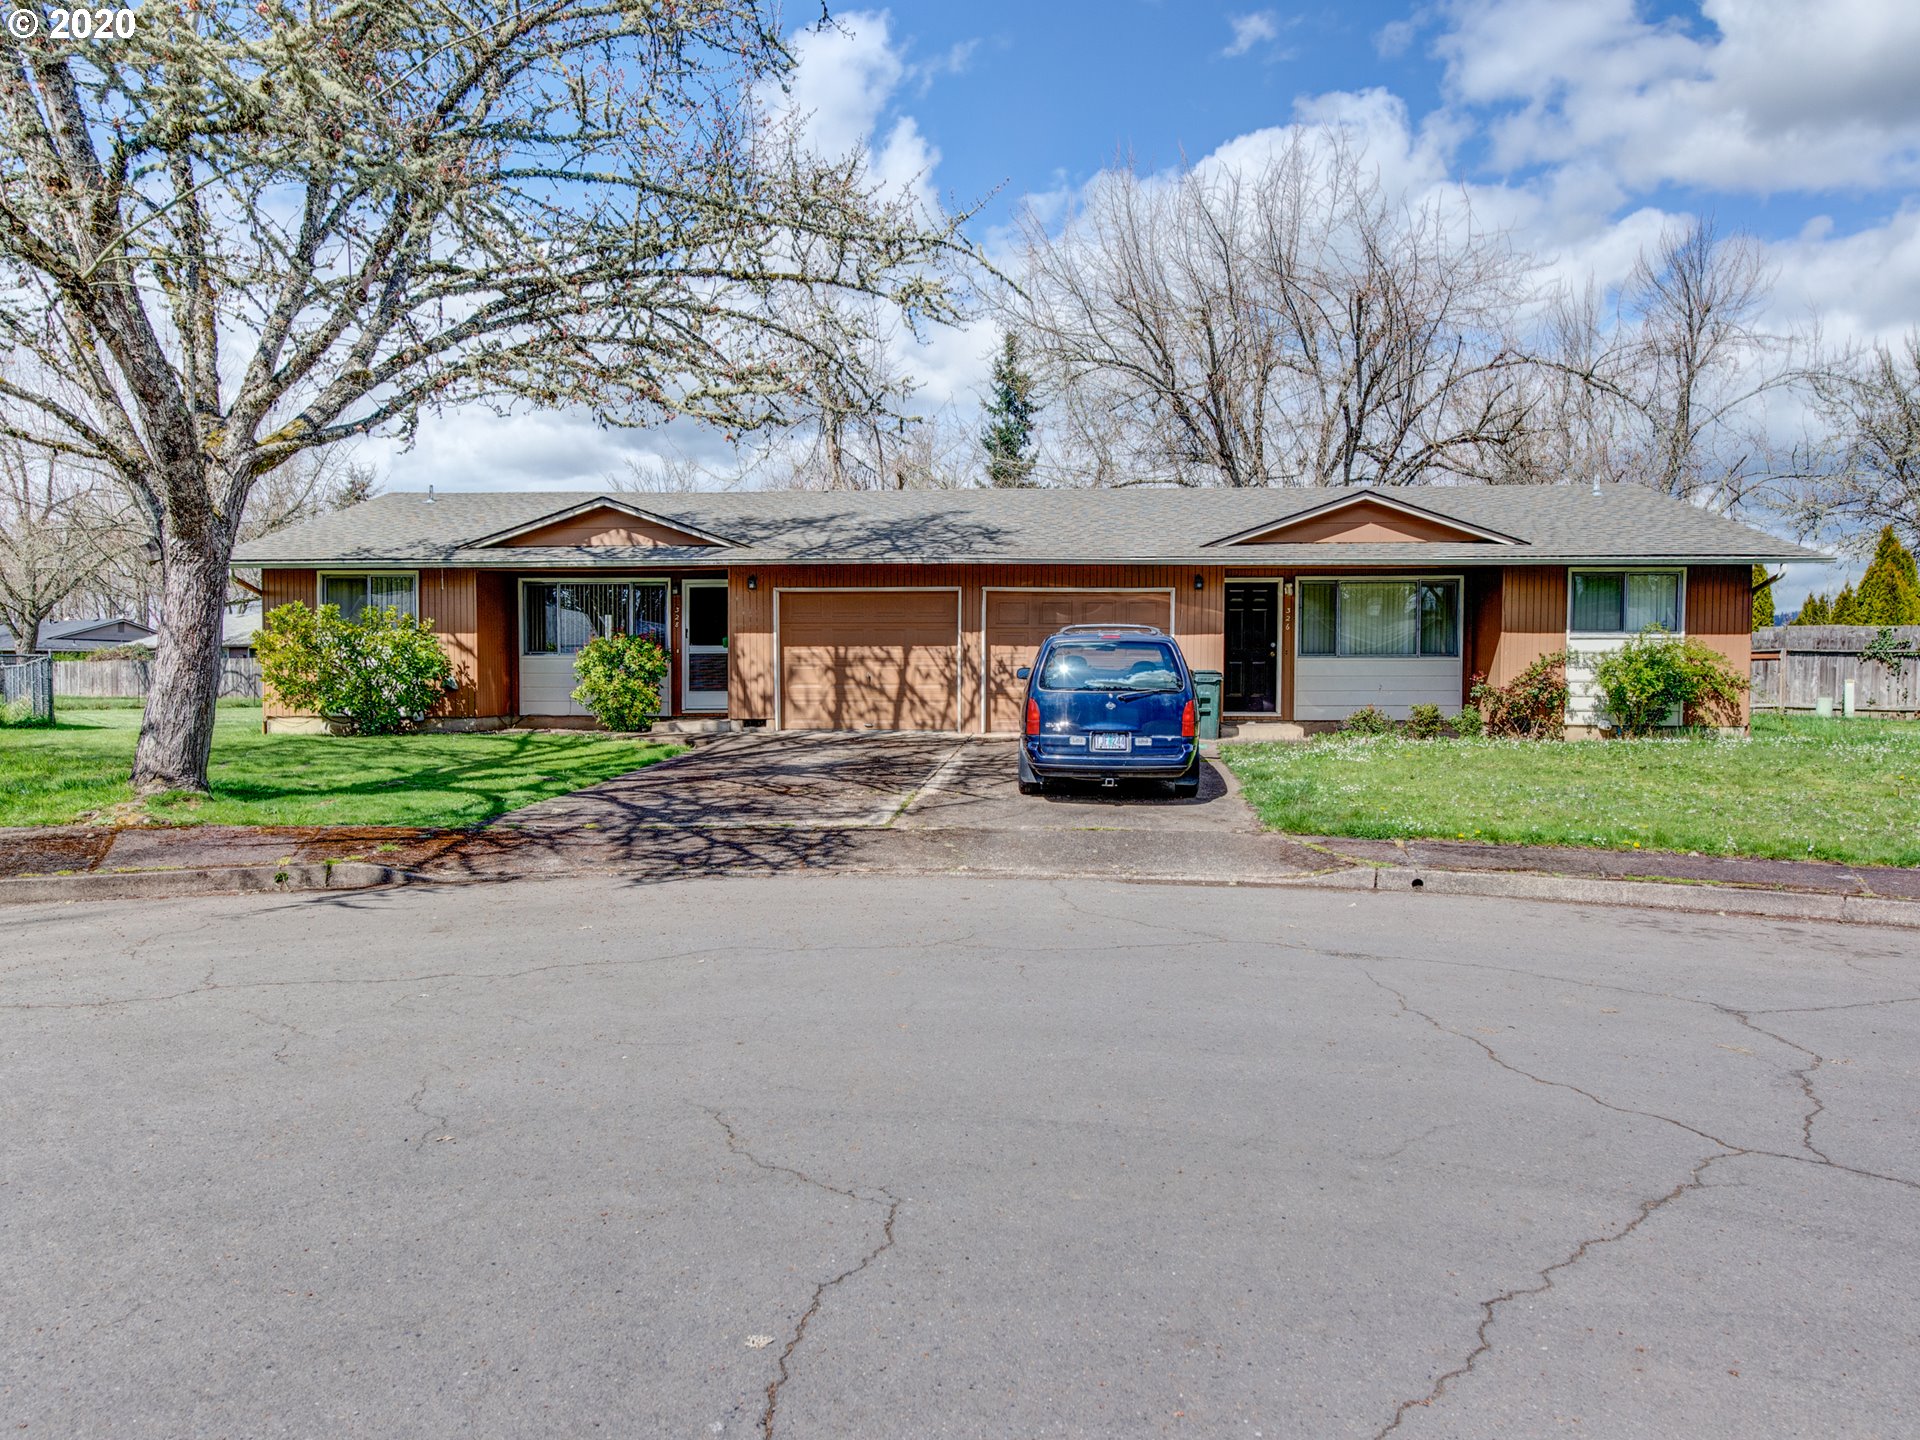 326 S 51ST PL (1 of 32)